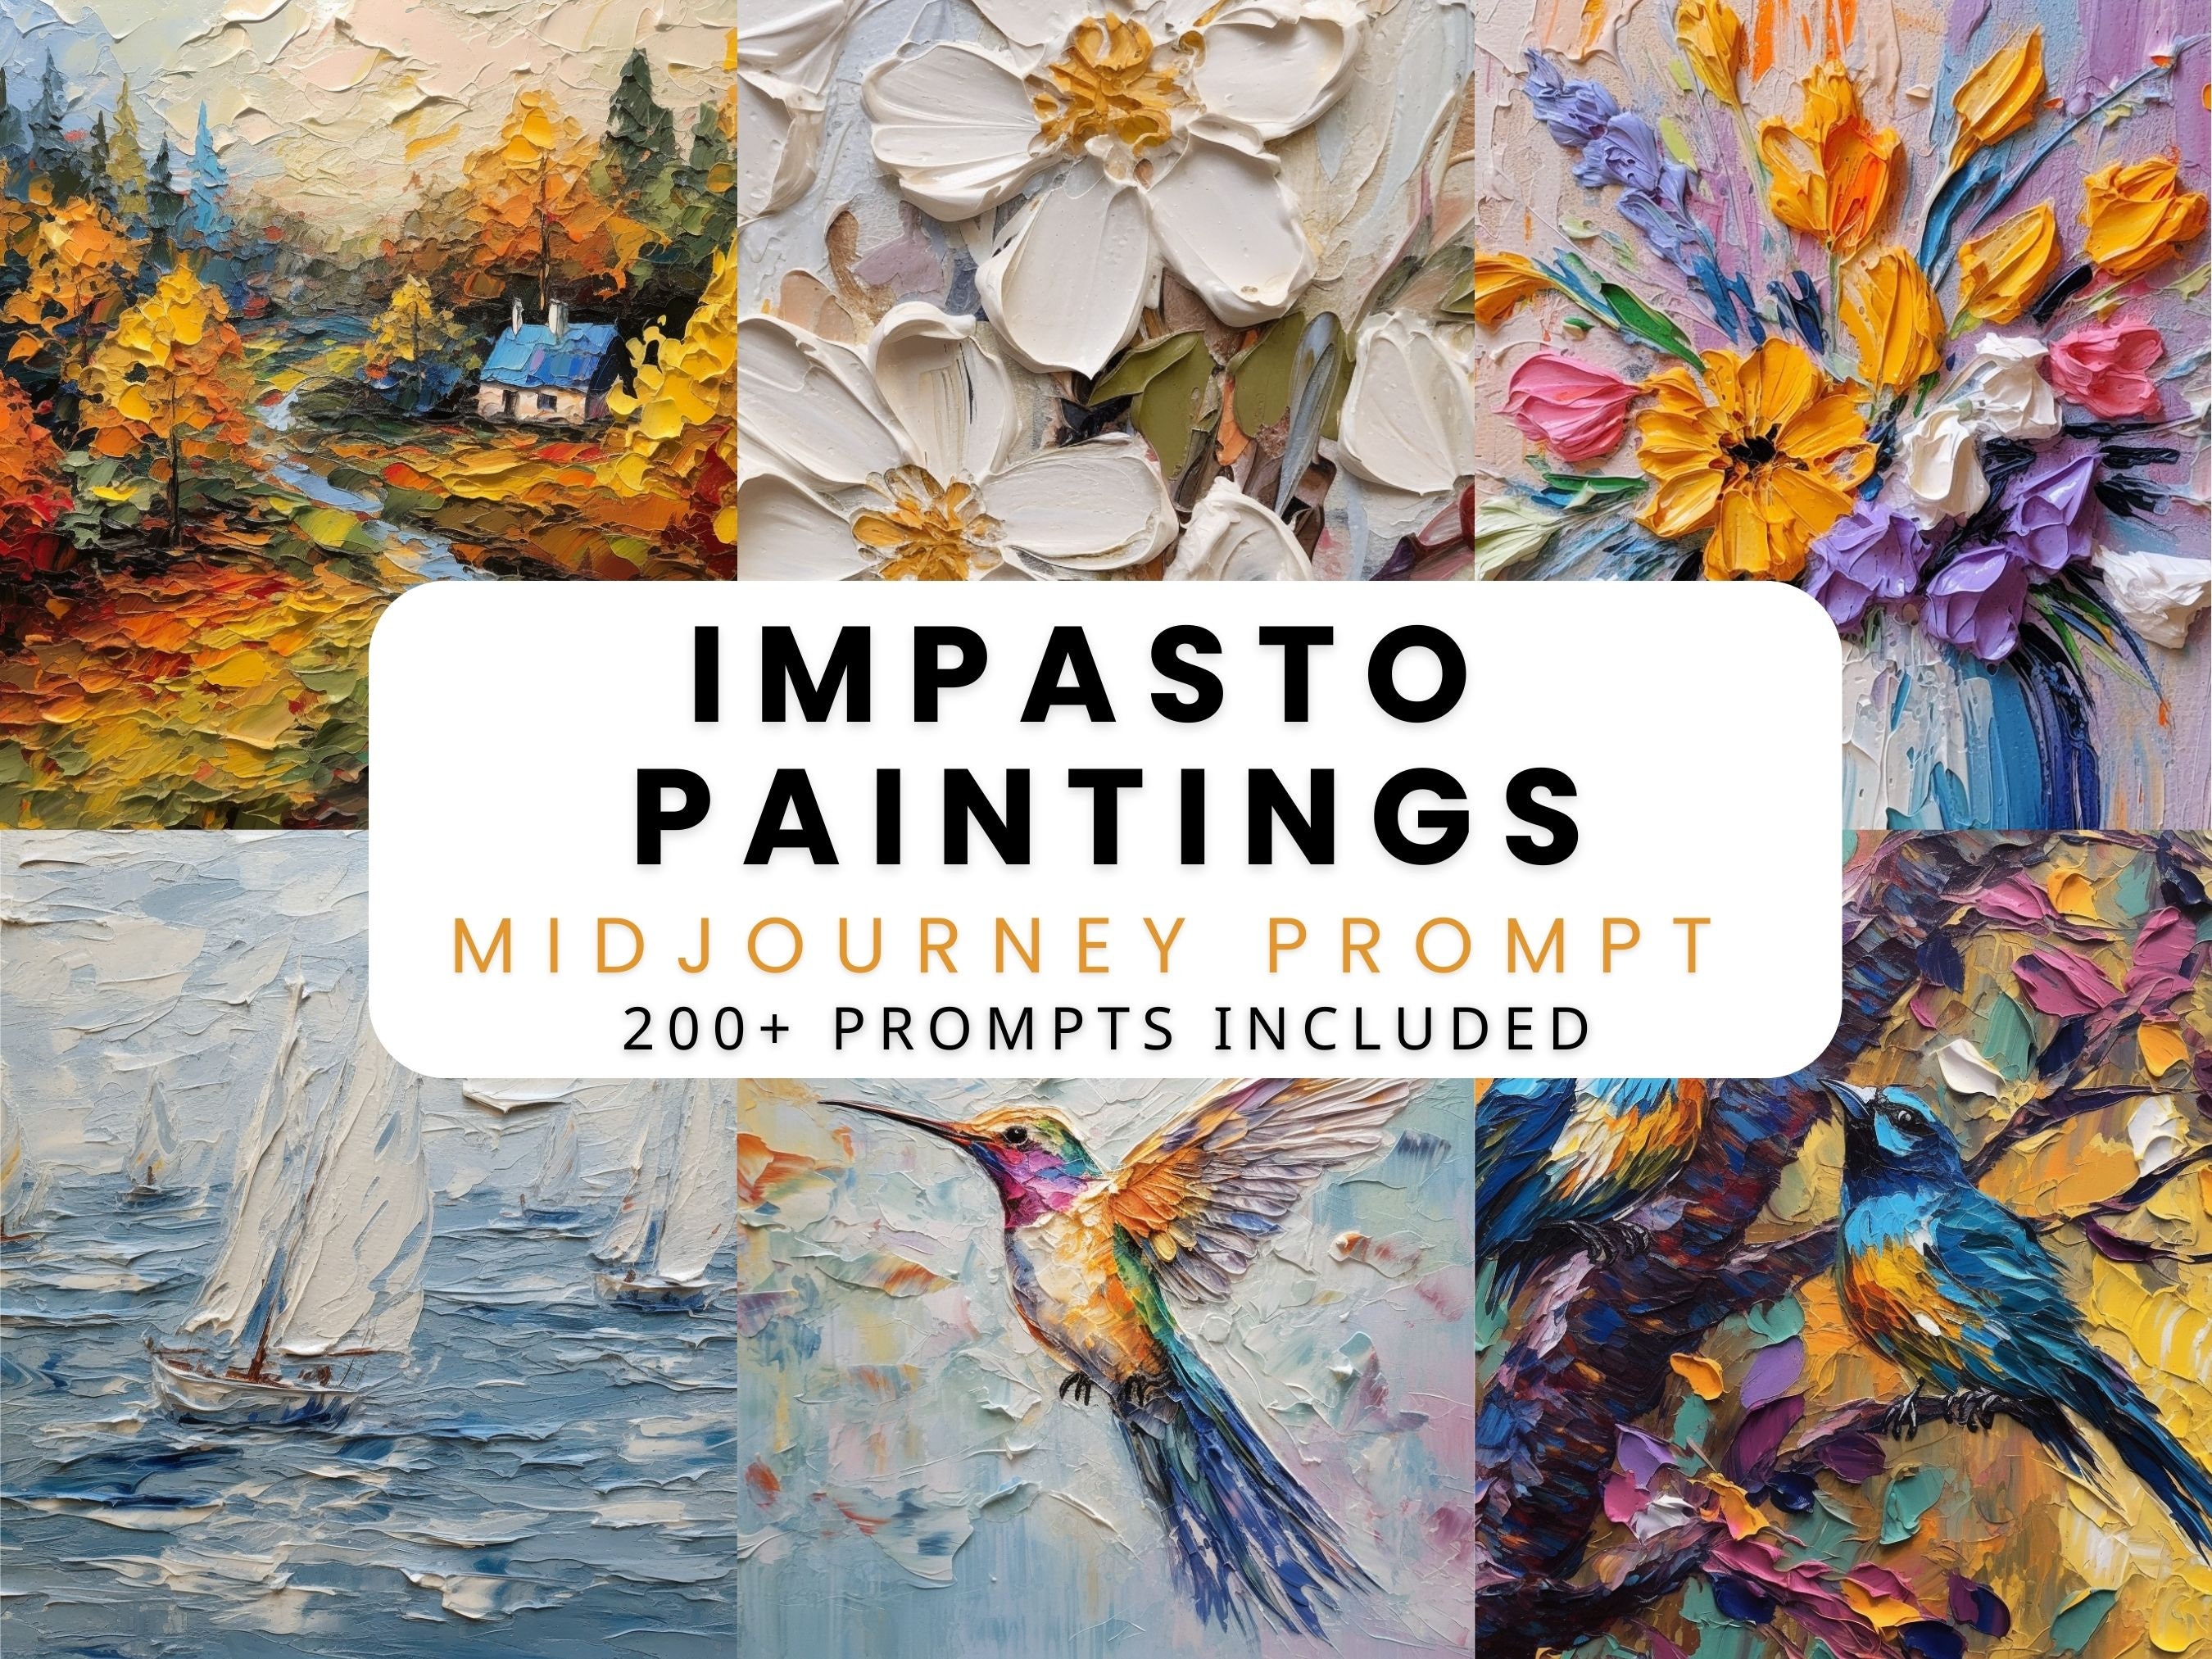 Your guide to the impasto painting technique